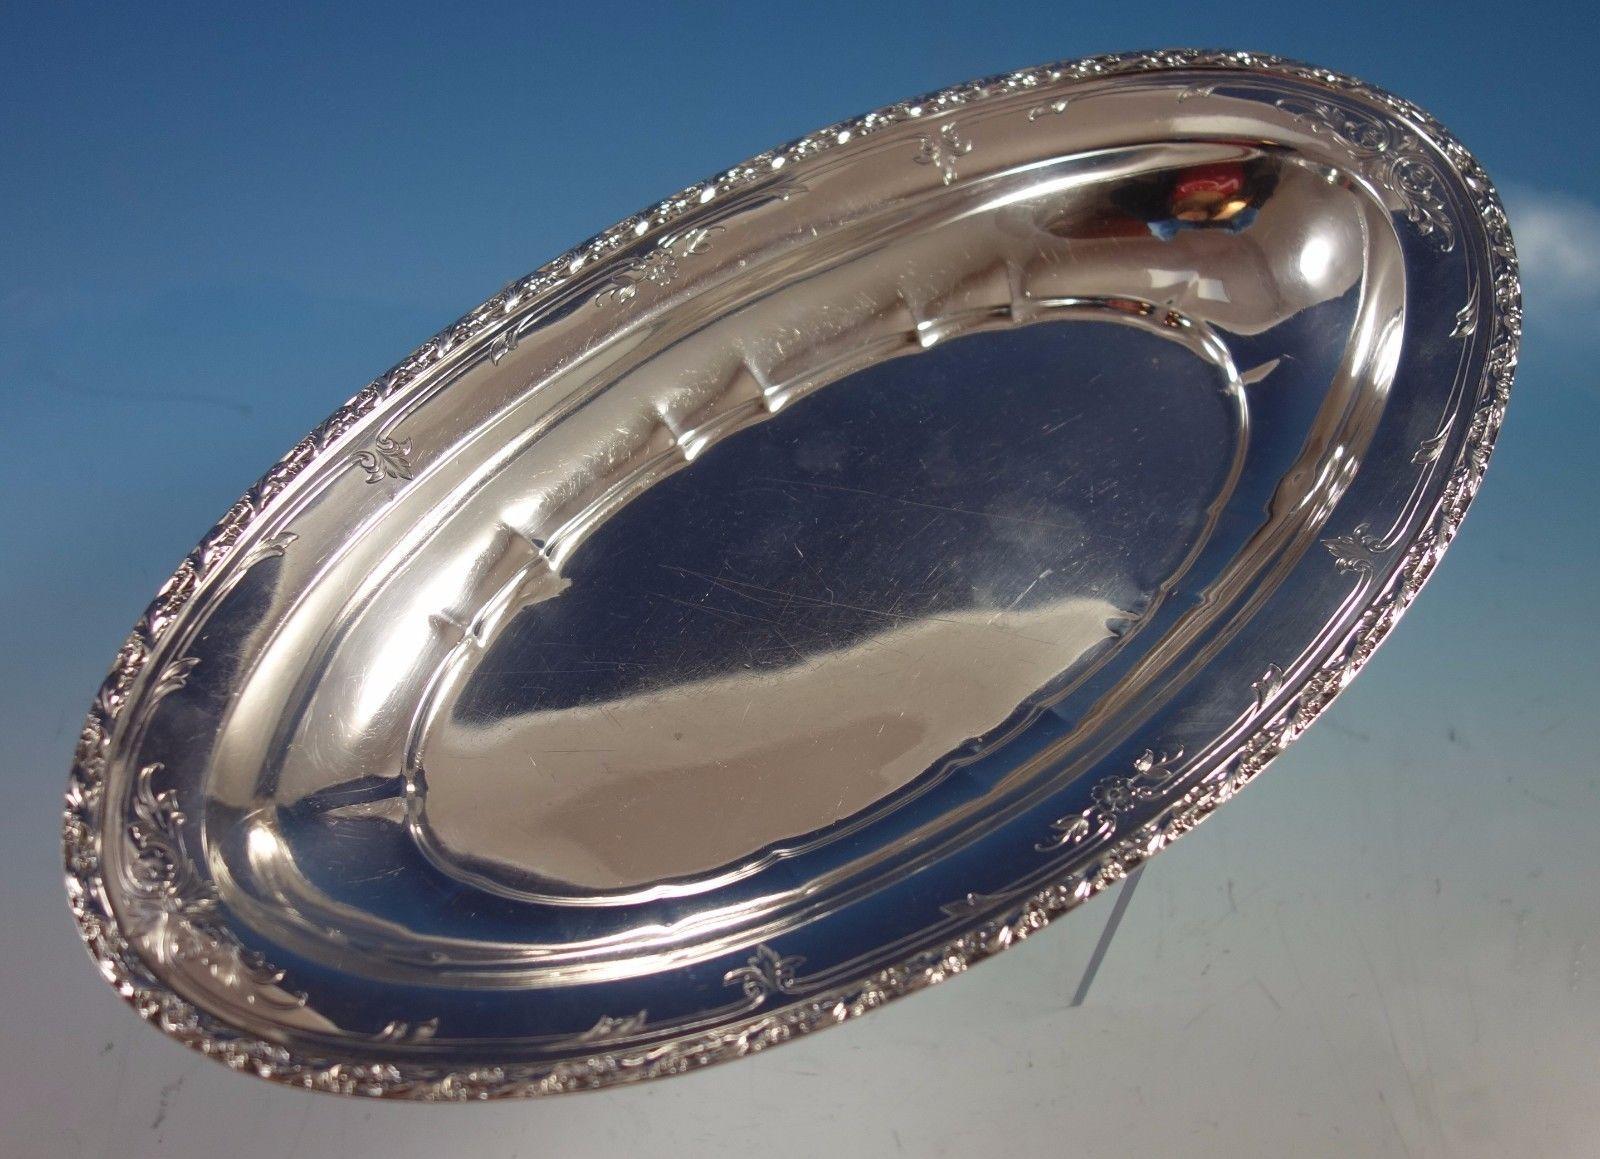 Princess Anne by Wallace 
Lovely sterling silver Princess Anne by Wallace oval bread bowl or bread tray, marked #3220-2. This piece weighs 7.57 troy ounces and measures 1 1/2